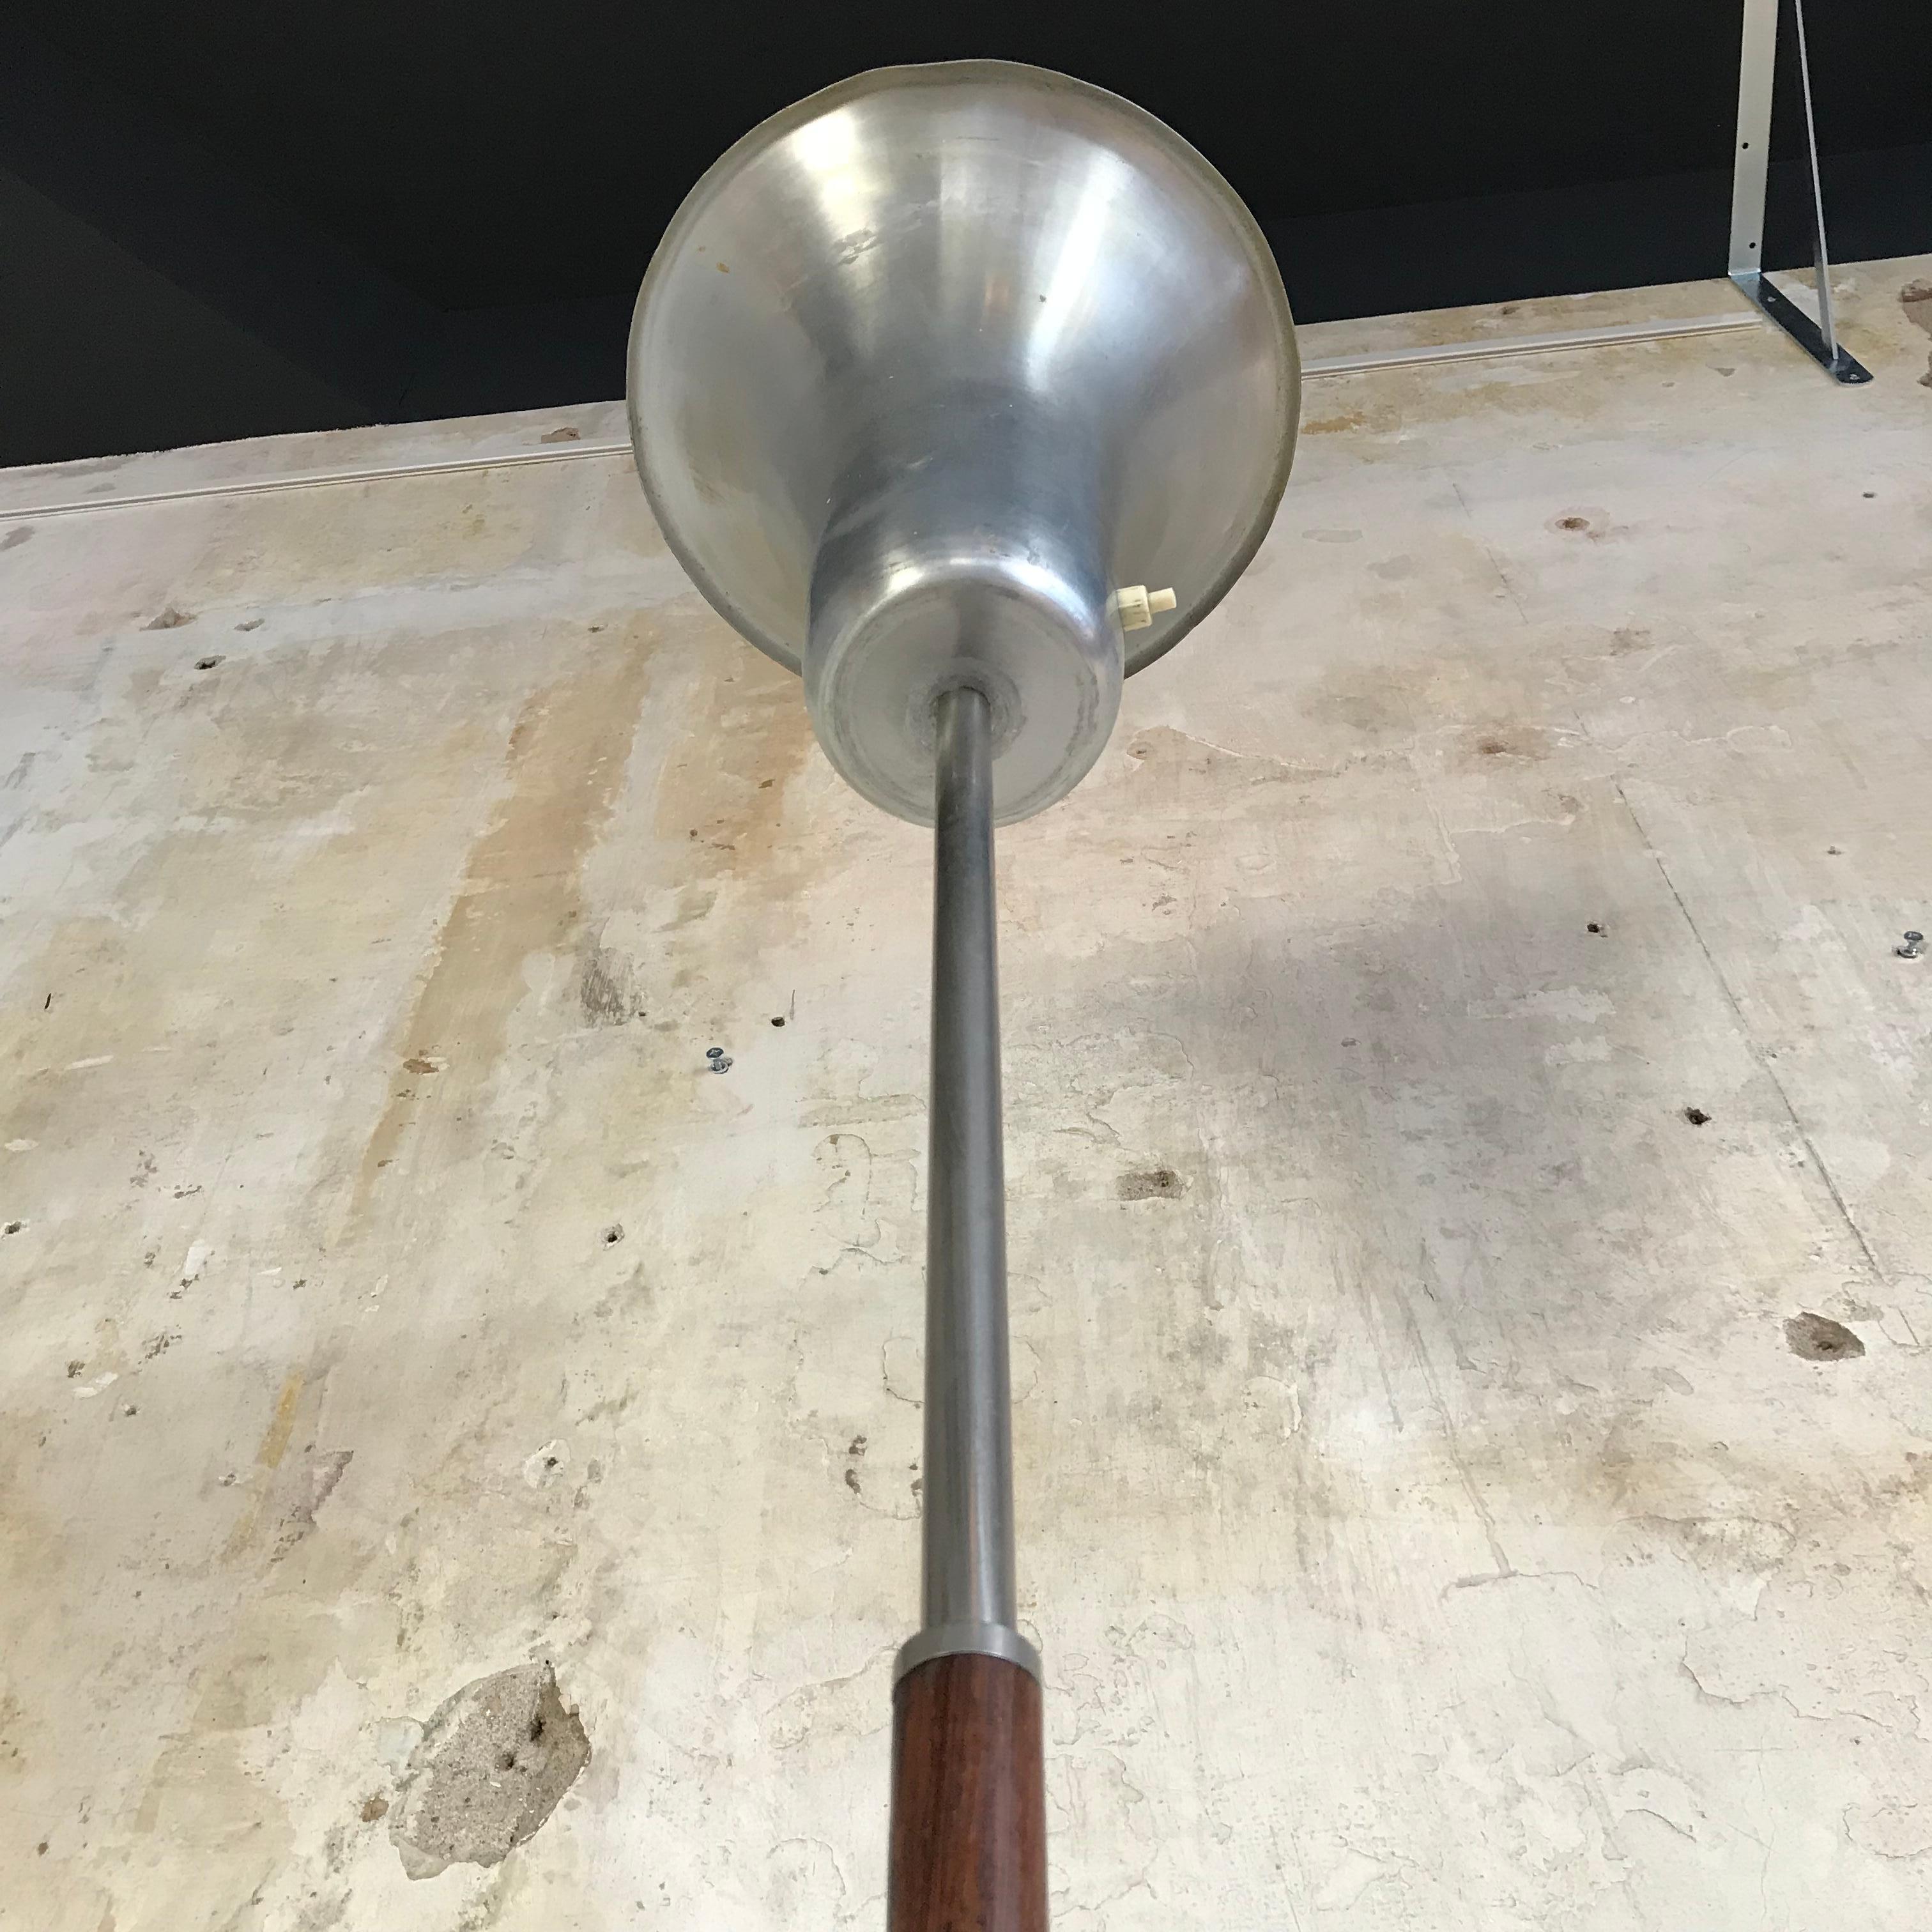 An amazing French Art Deco fluted uplighter or torchère, 1930s.
Deco era trumpet torchère in the classic style. Features an aluminium shade with original switch, central teak wood rod and metal tripod base.